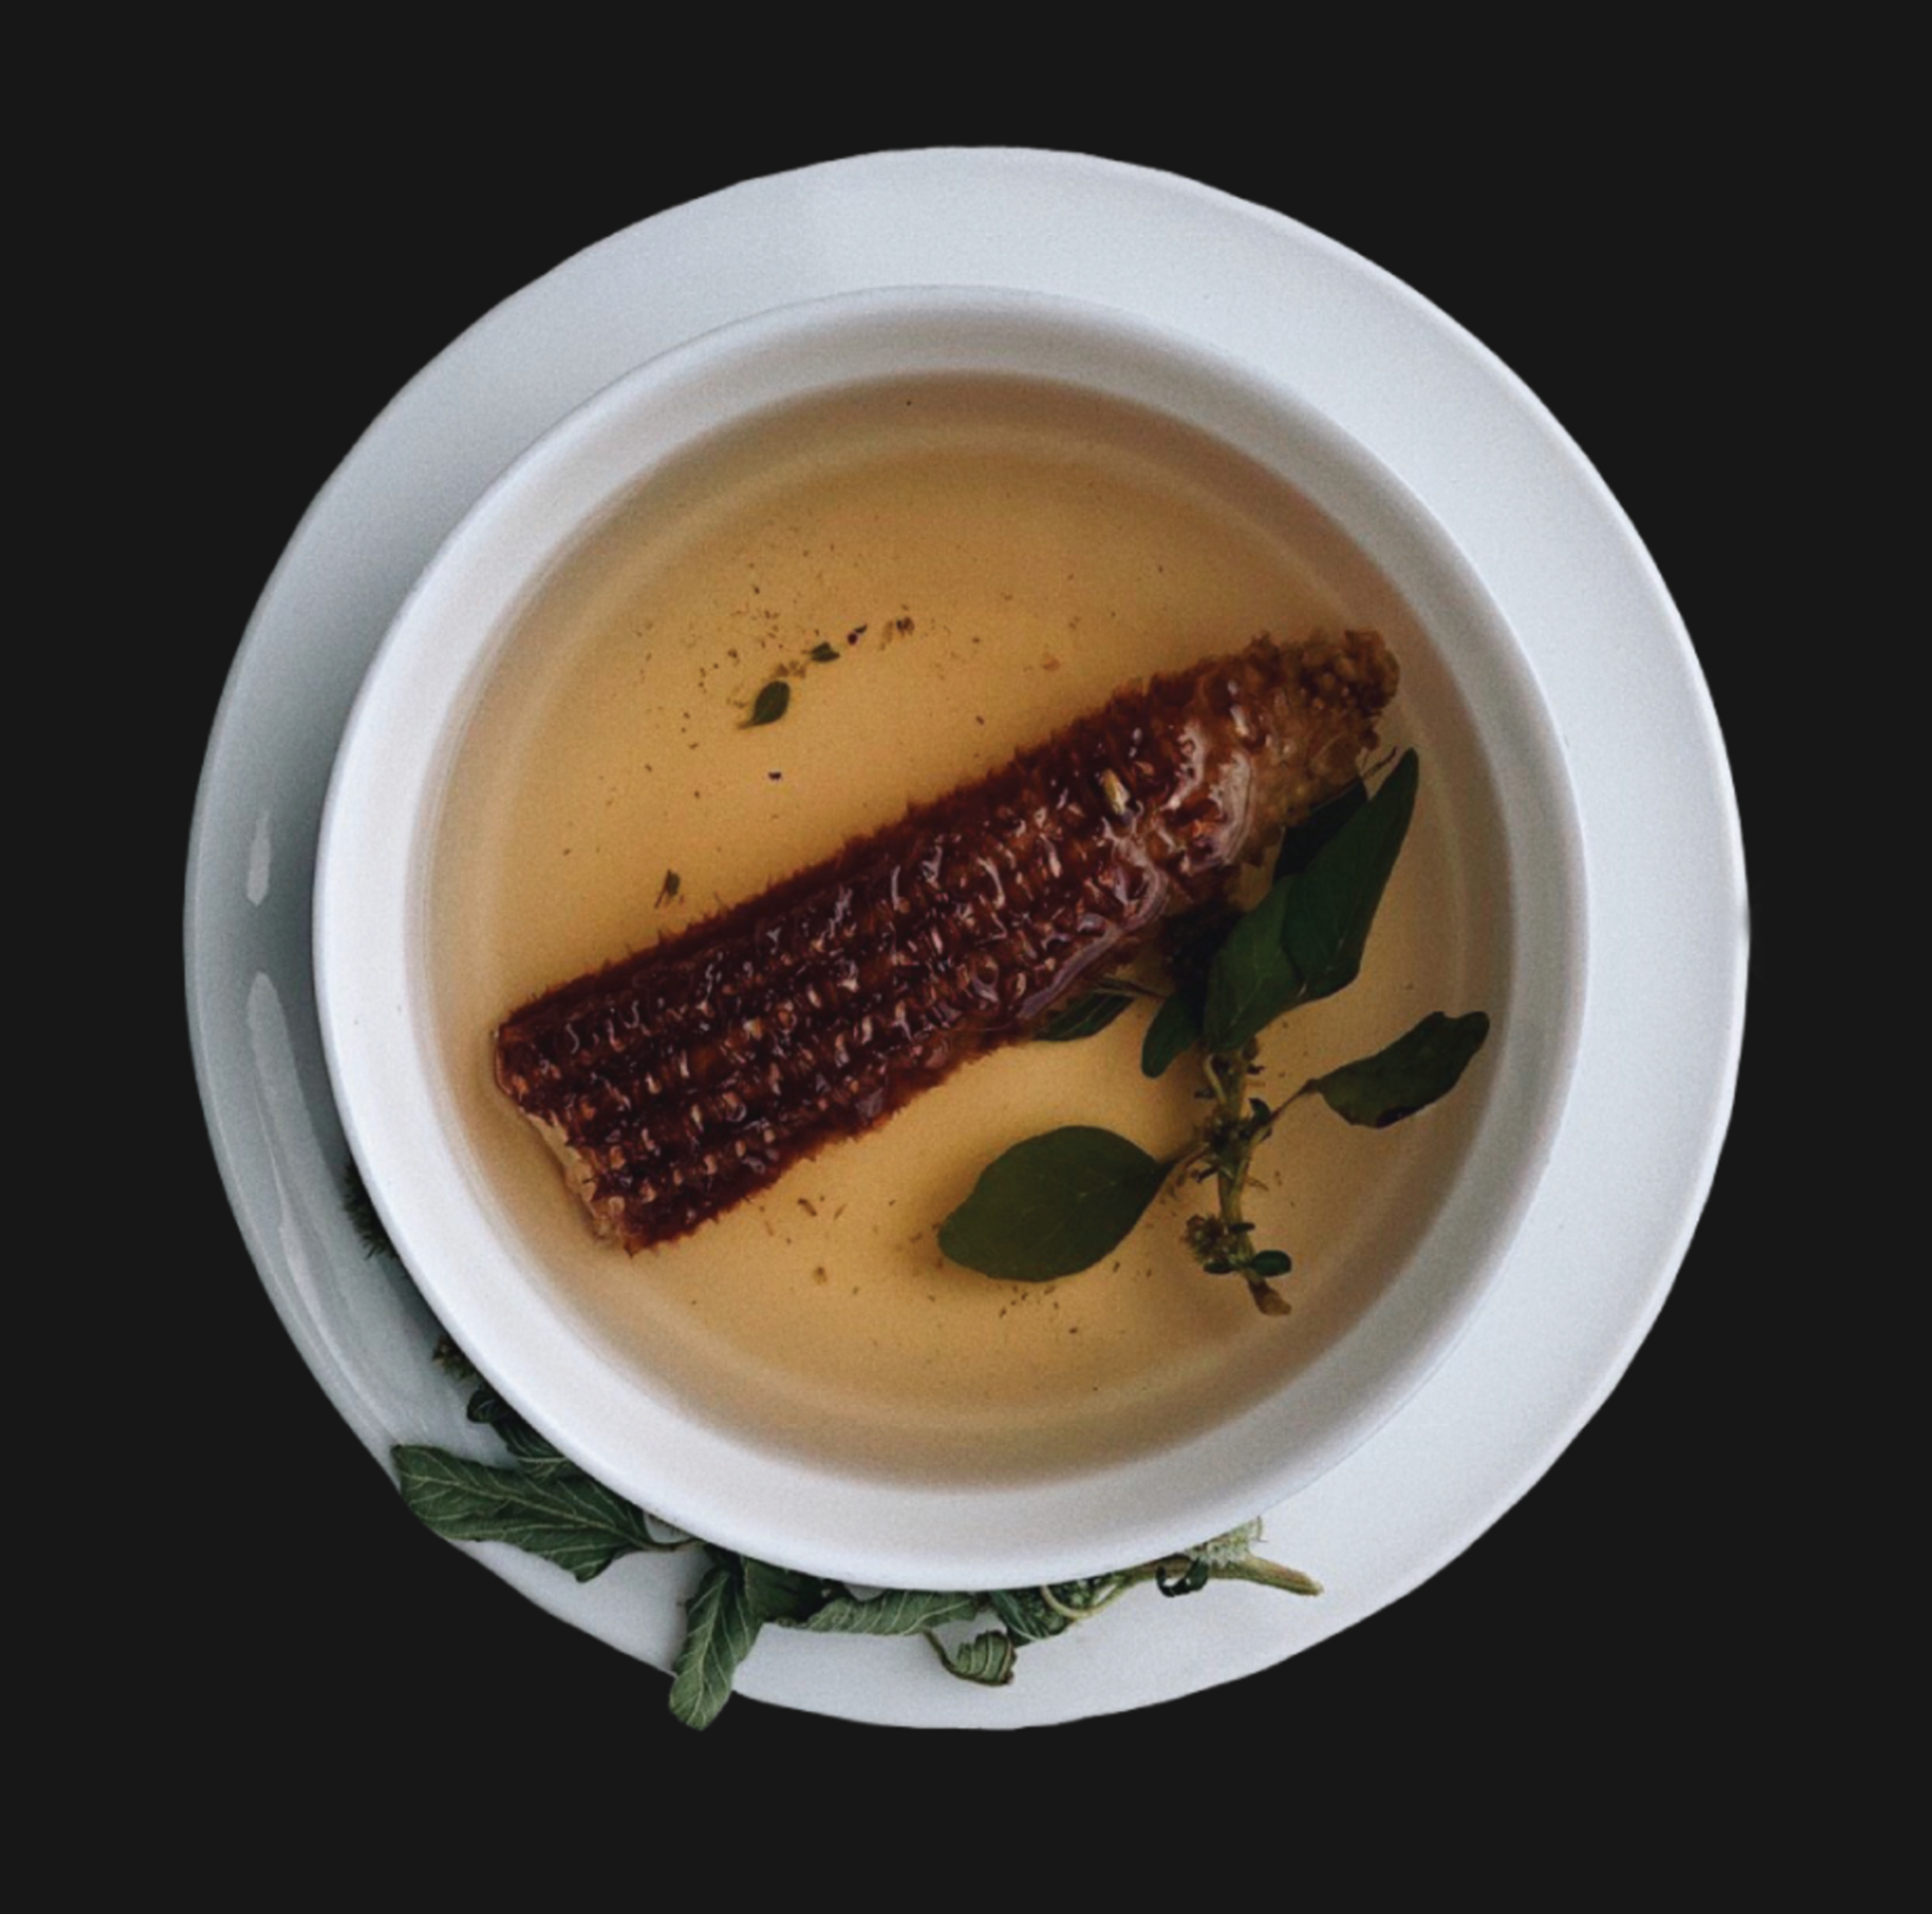 A bowl of soup sits on a saucer, inside the clear broth sits a dried corn cob and herbs.